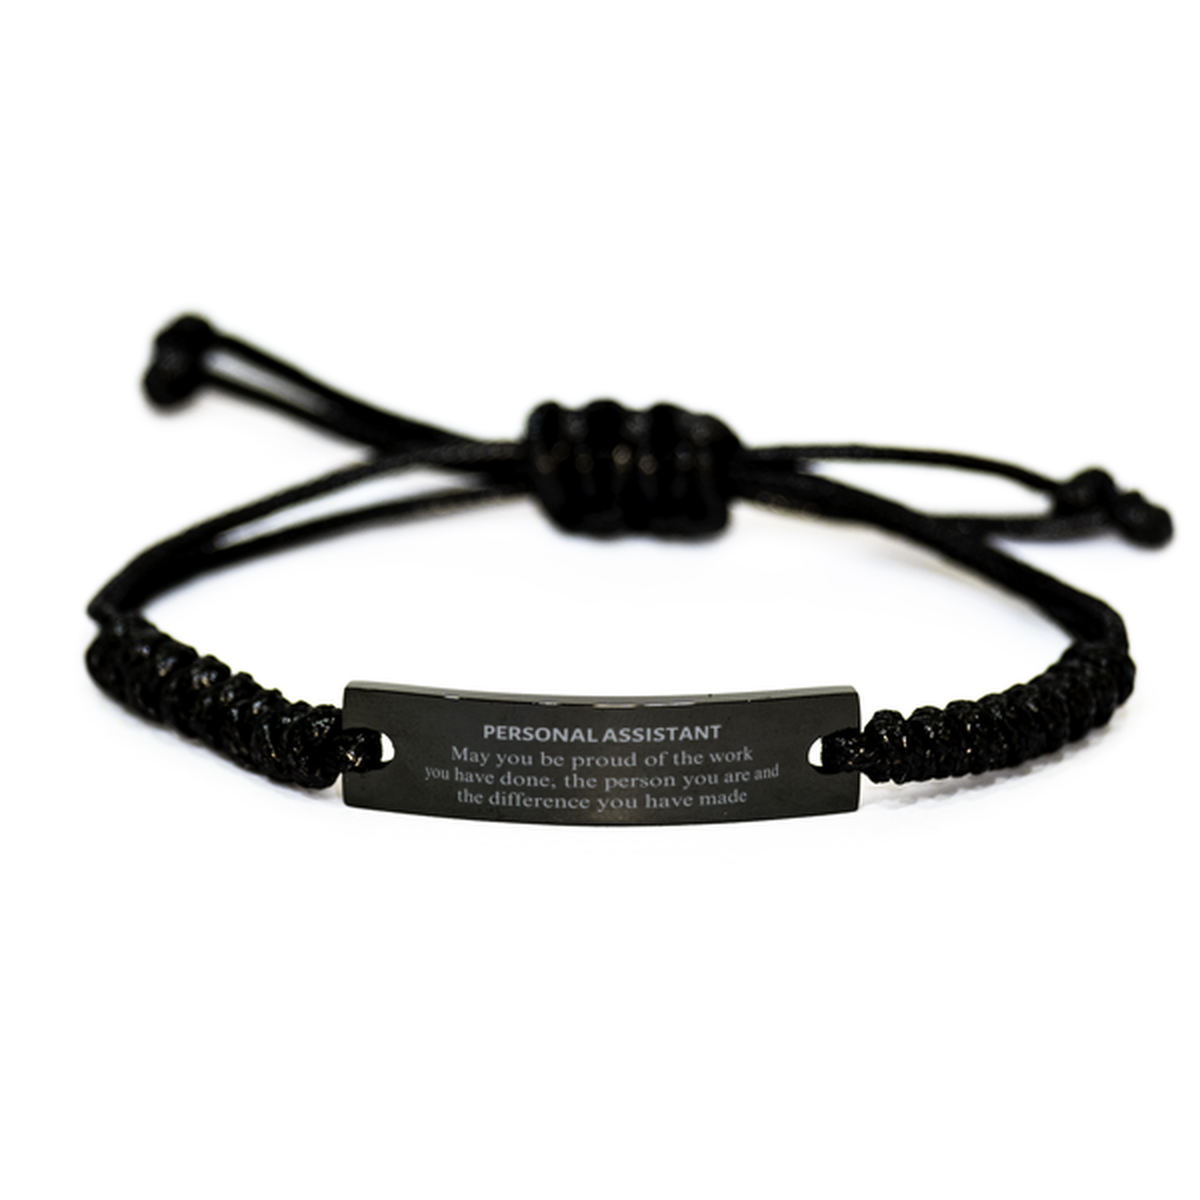 Personal Assistant May you be proud of the work you have done, Retirement Personal Assistant Black Rope Bracelet for Colleague Appreciation Gifts Amazing for Personal Assistant